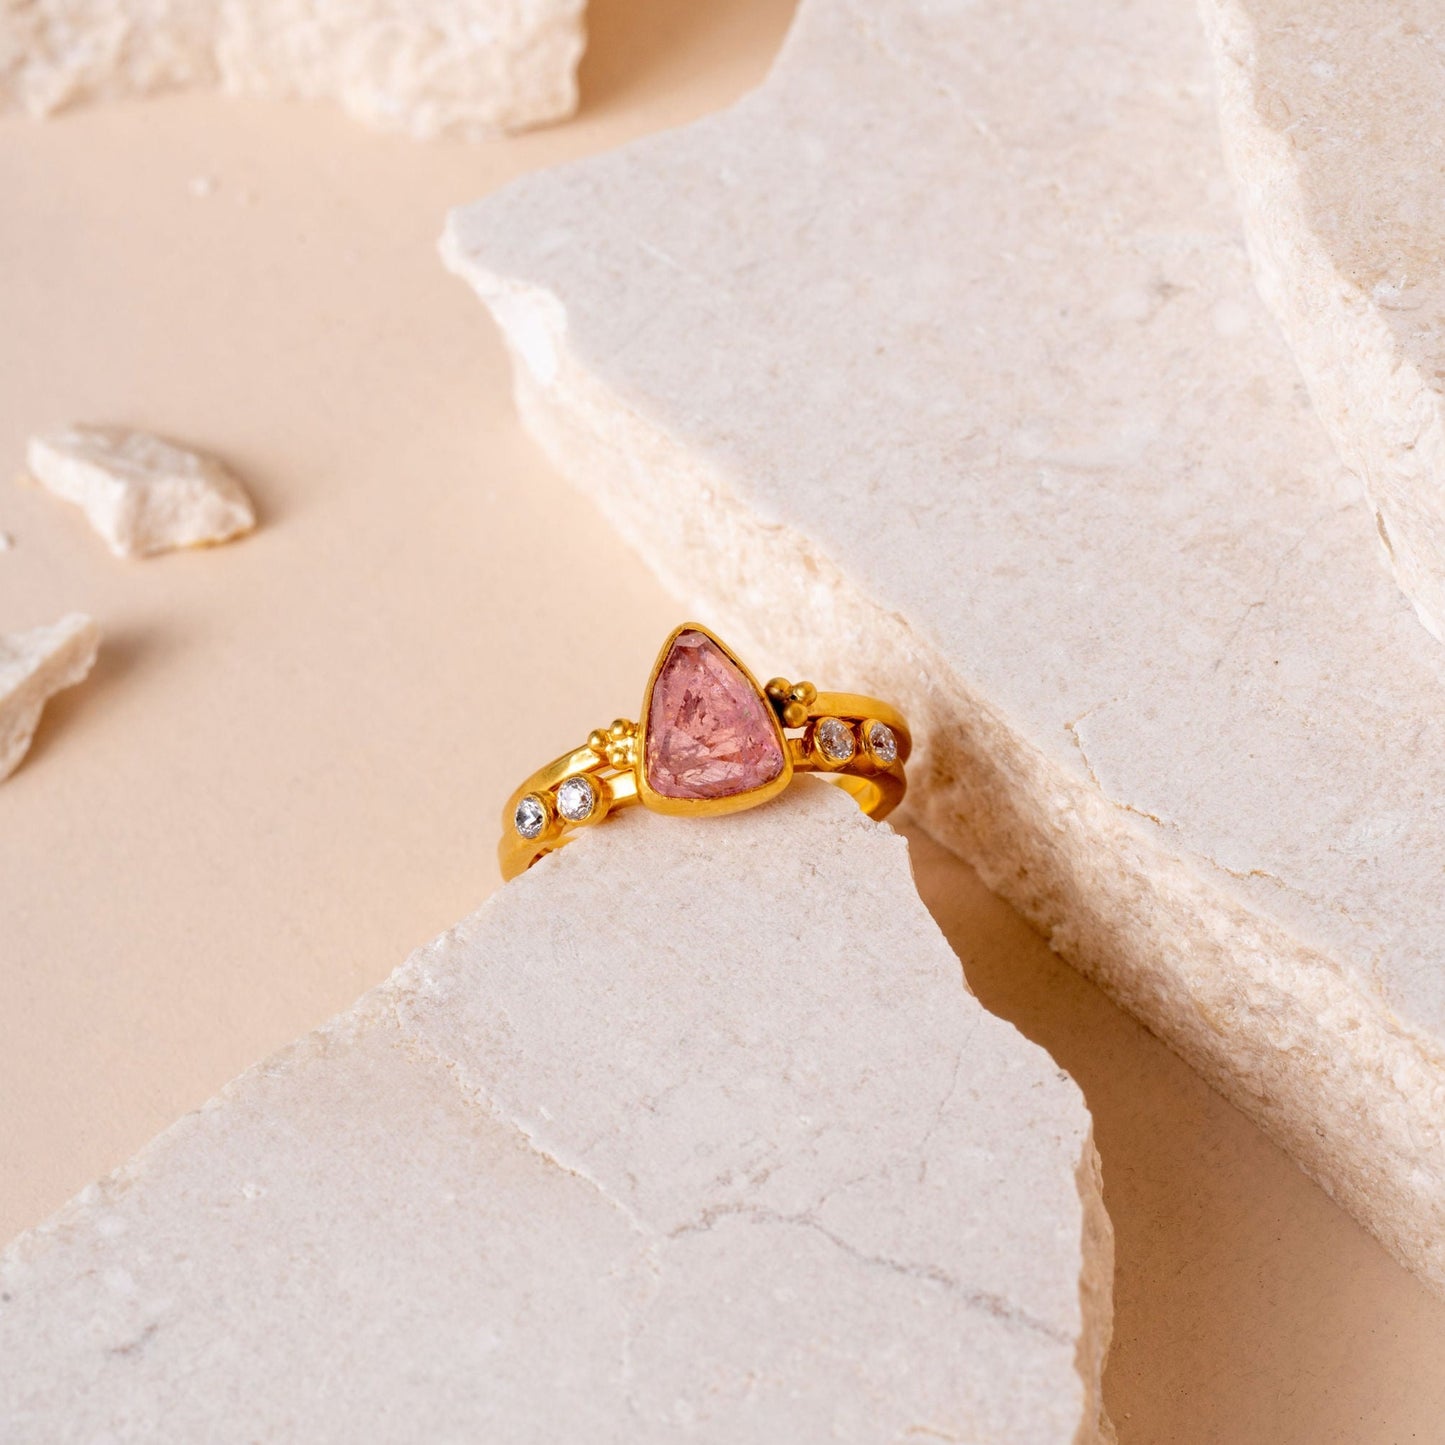 gold ring showcasing a hand-cut pink tourmaline, crafted with artistry and granulation accents.